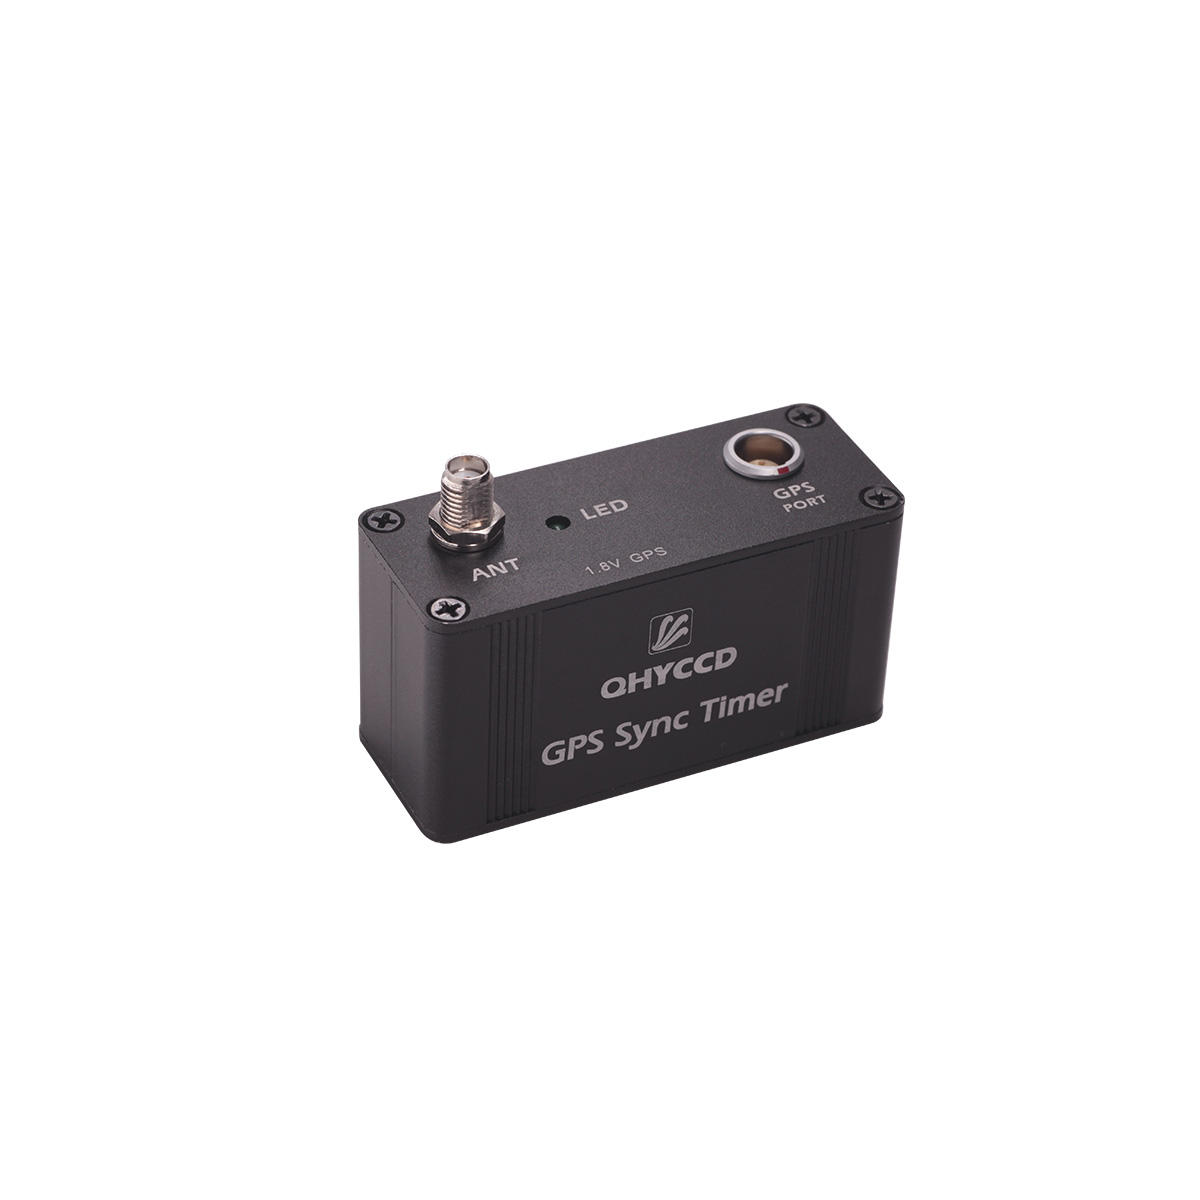 The QHY-GPSBOX is a compact camera accessory that provides high-precision GPS hardware time scales allowing some QHYCCD cameras to obtain accurate time information of the camera's exposure time. 